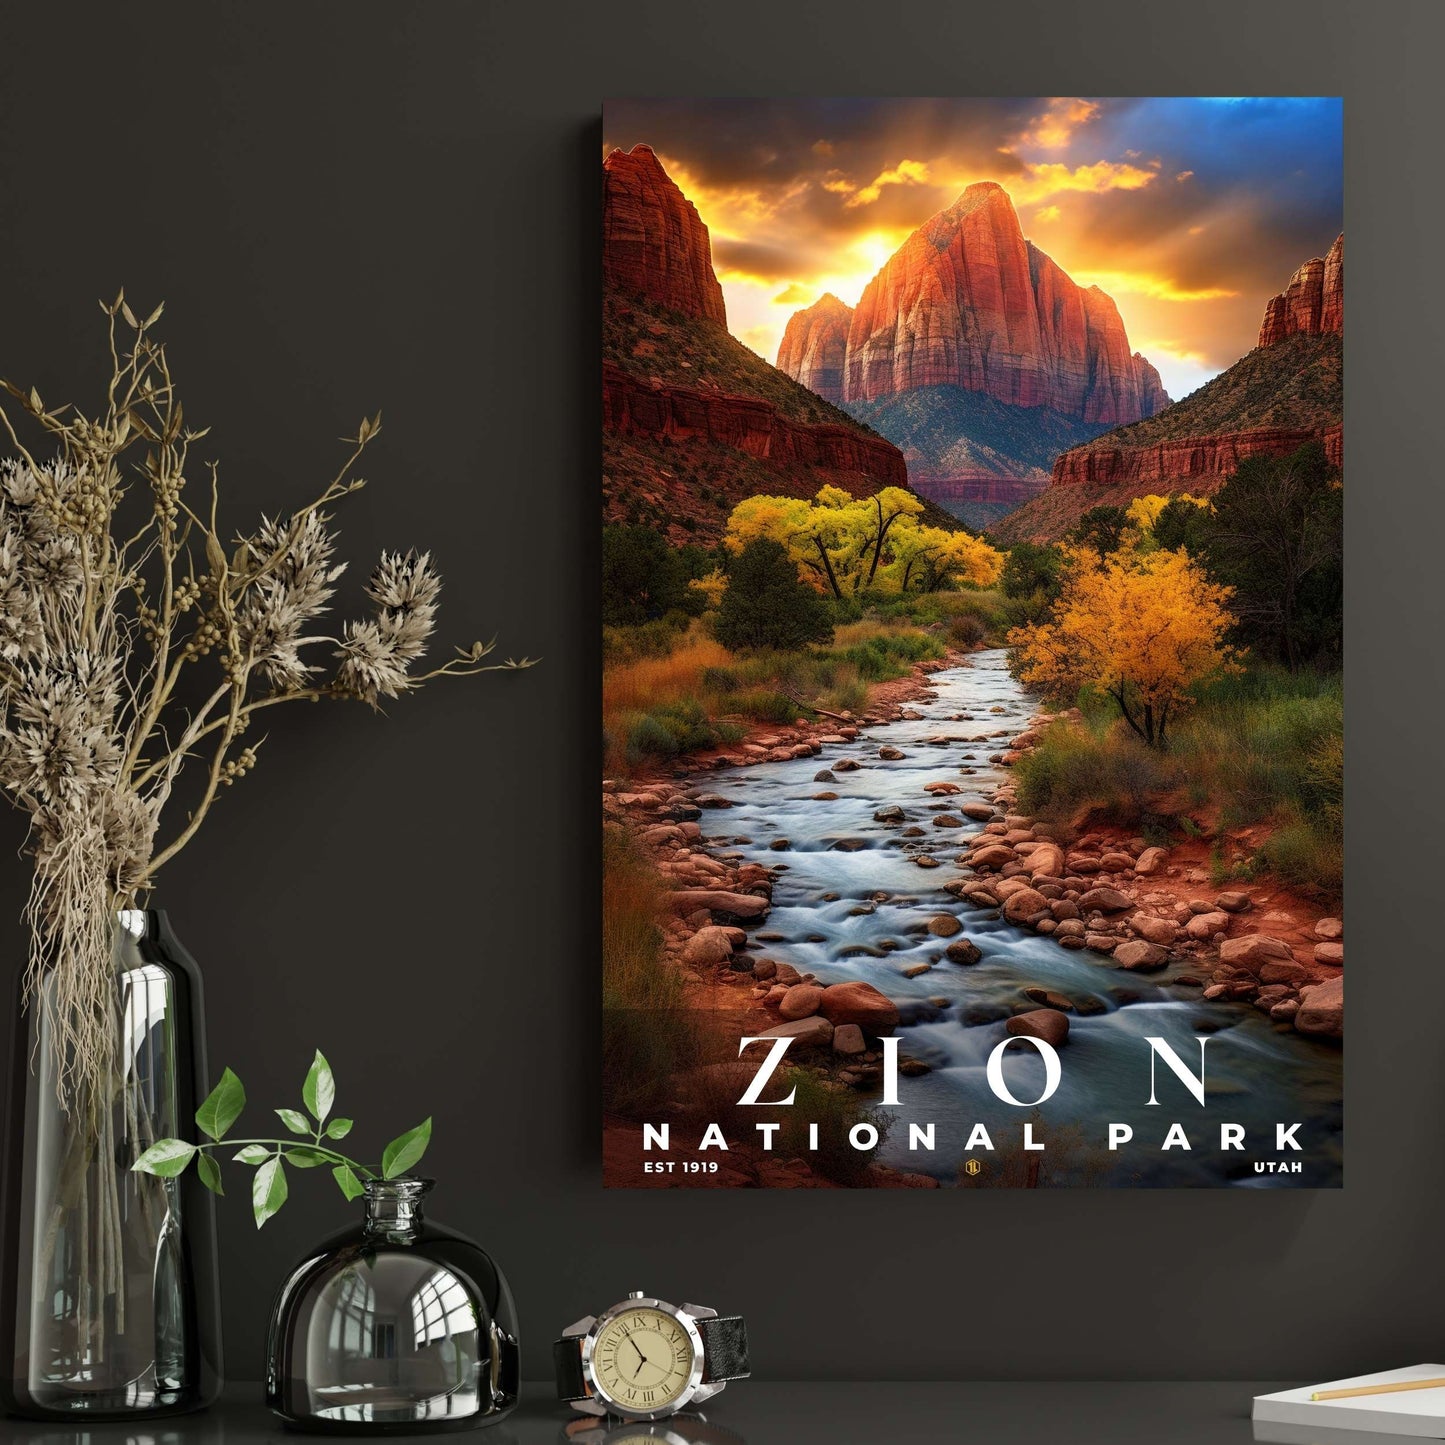 Zion National Park Poster | S10